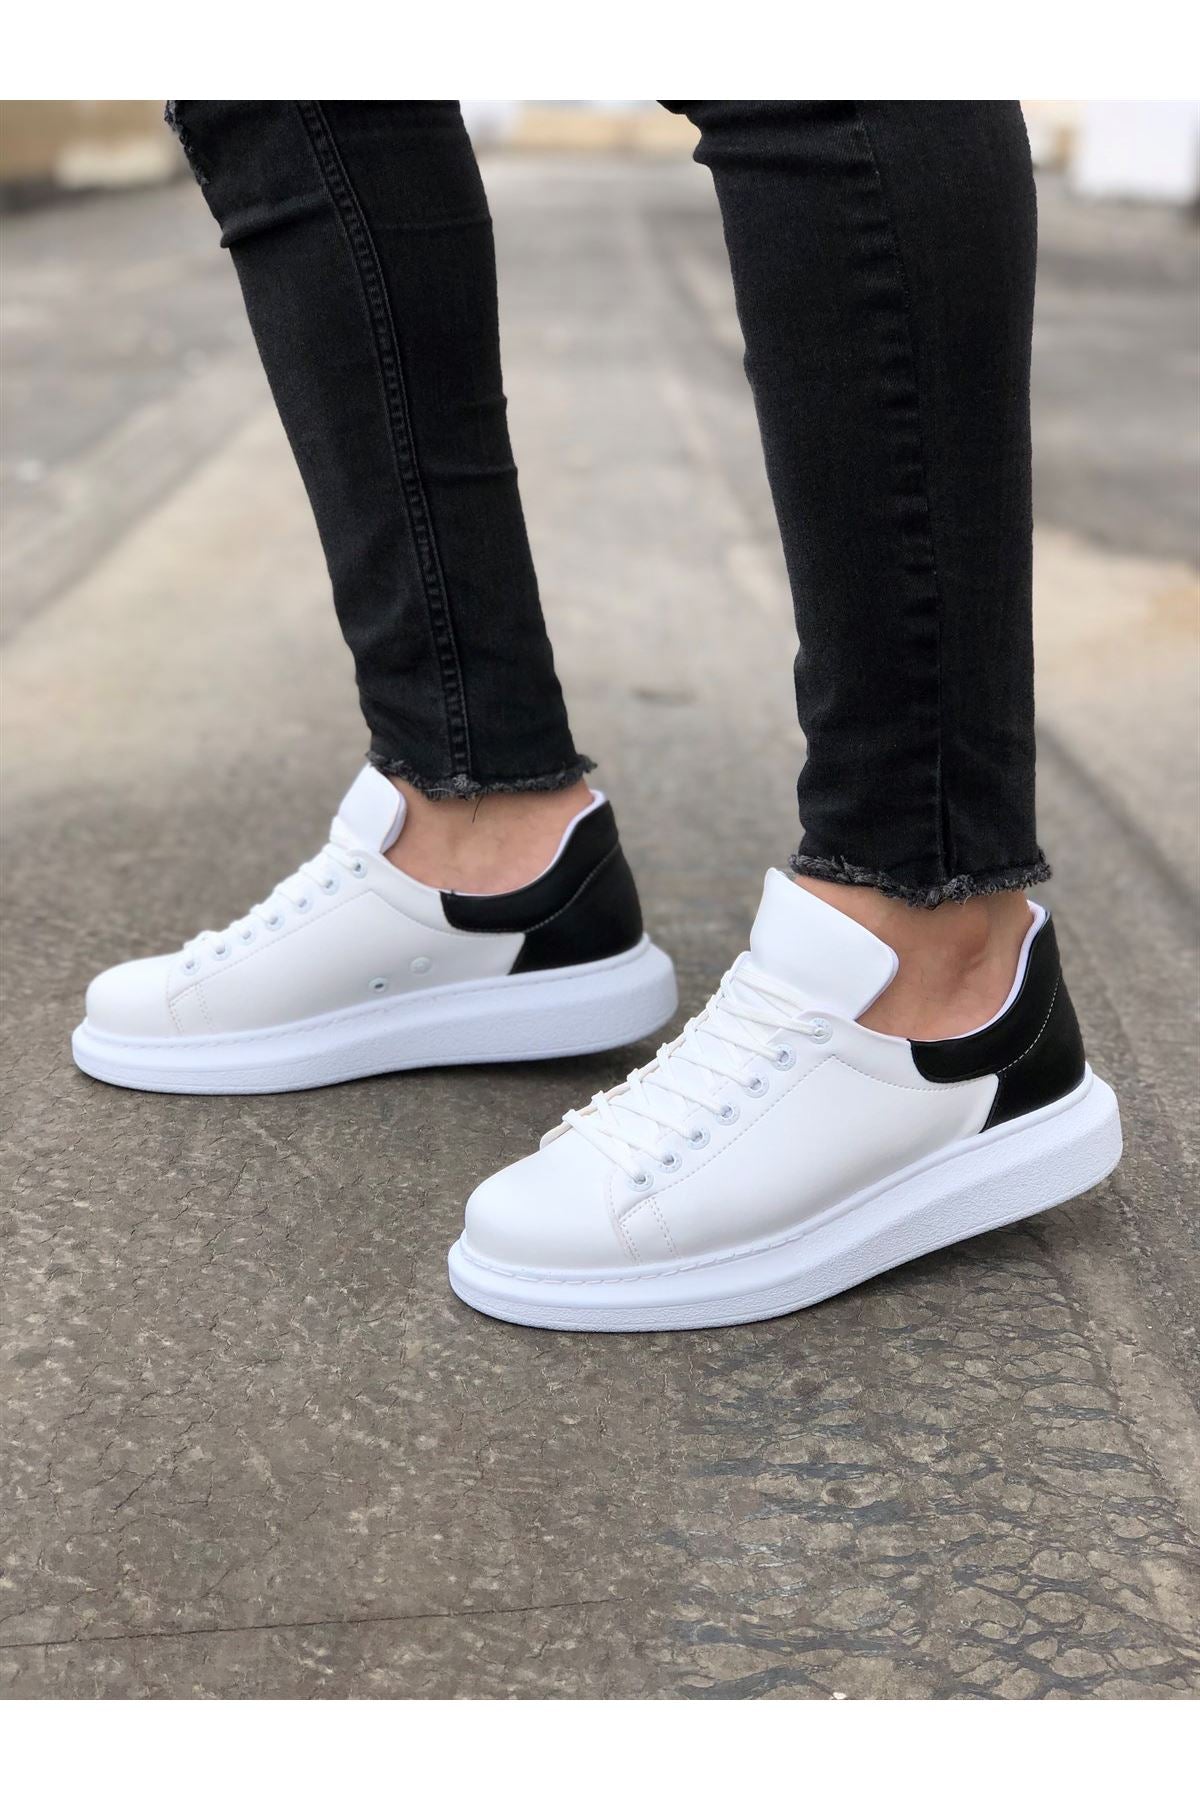 CH256 Men's Unisex White-Black Casual Sneaker Sports Shoes - STREETMODE ™